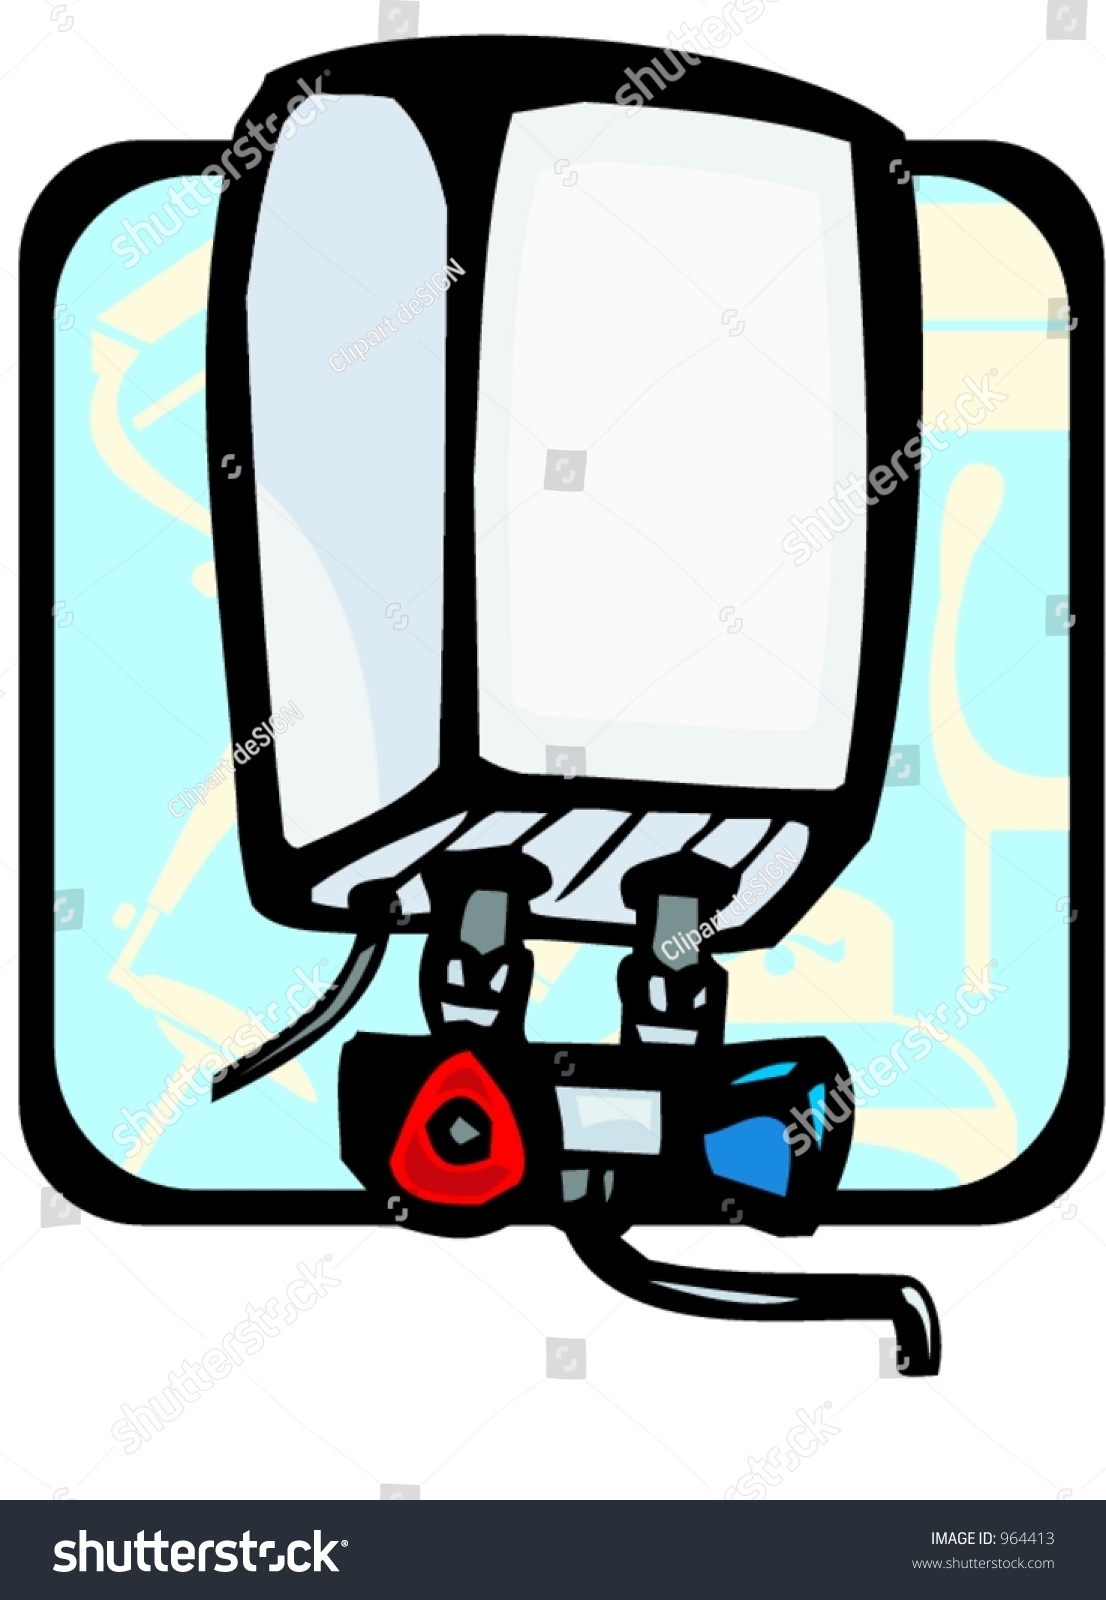 clipart water heater - photo #48